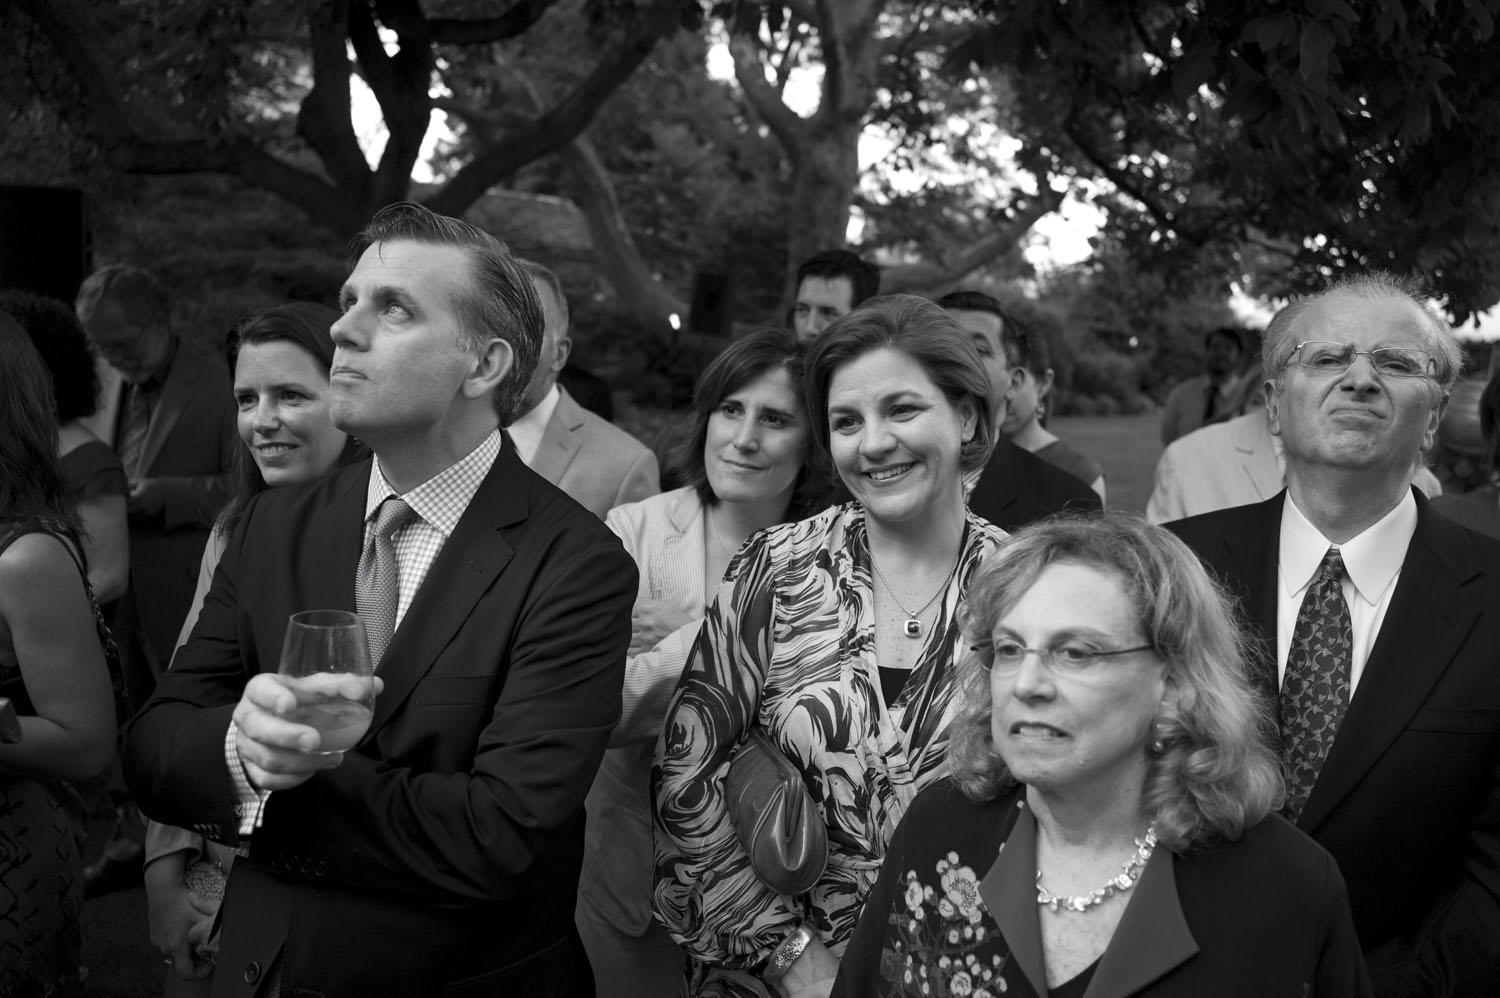 Onlookers watch the wedding ceremony between Chief Policy Advisor and Criminal Justice Coordinator John Feinblatt and the Department of Consumer Affairs Commissioner Jonathan Mintz. The ceremony was held at Gracie Mansion on the Upper East Side and was officiated by New York City Mayor Michael Bloomberg.